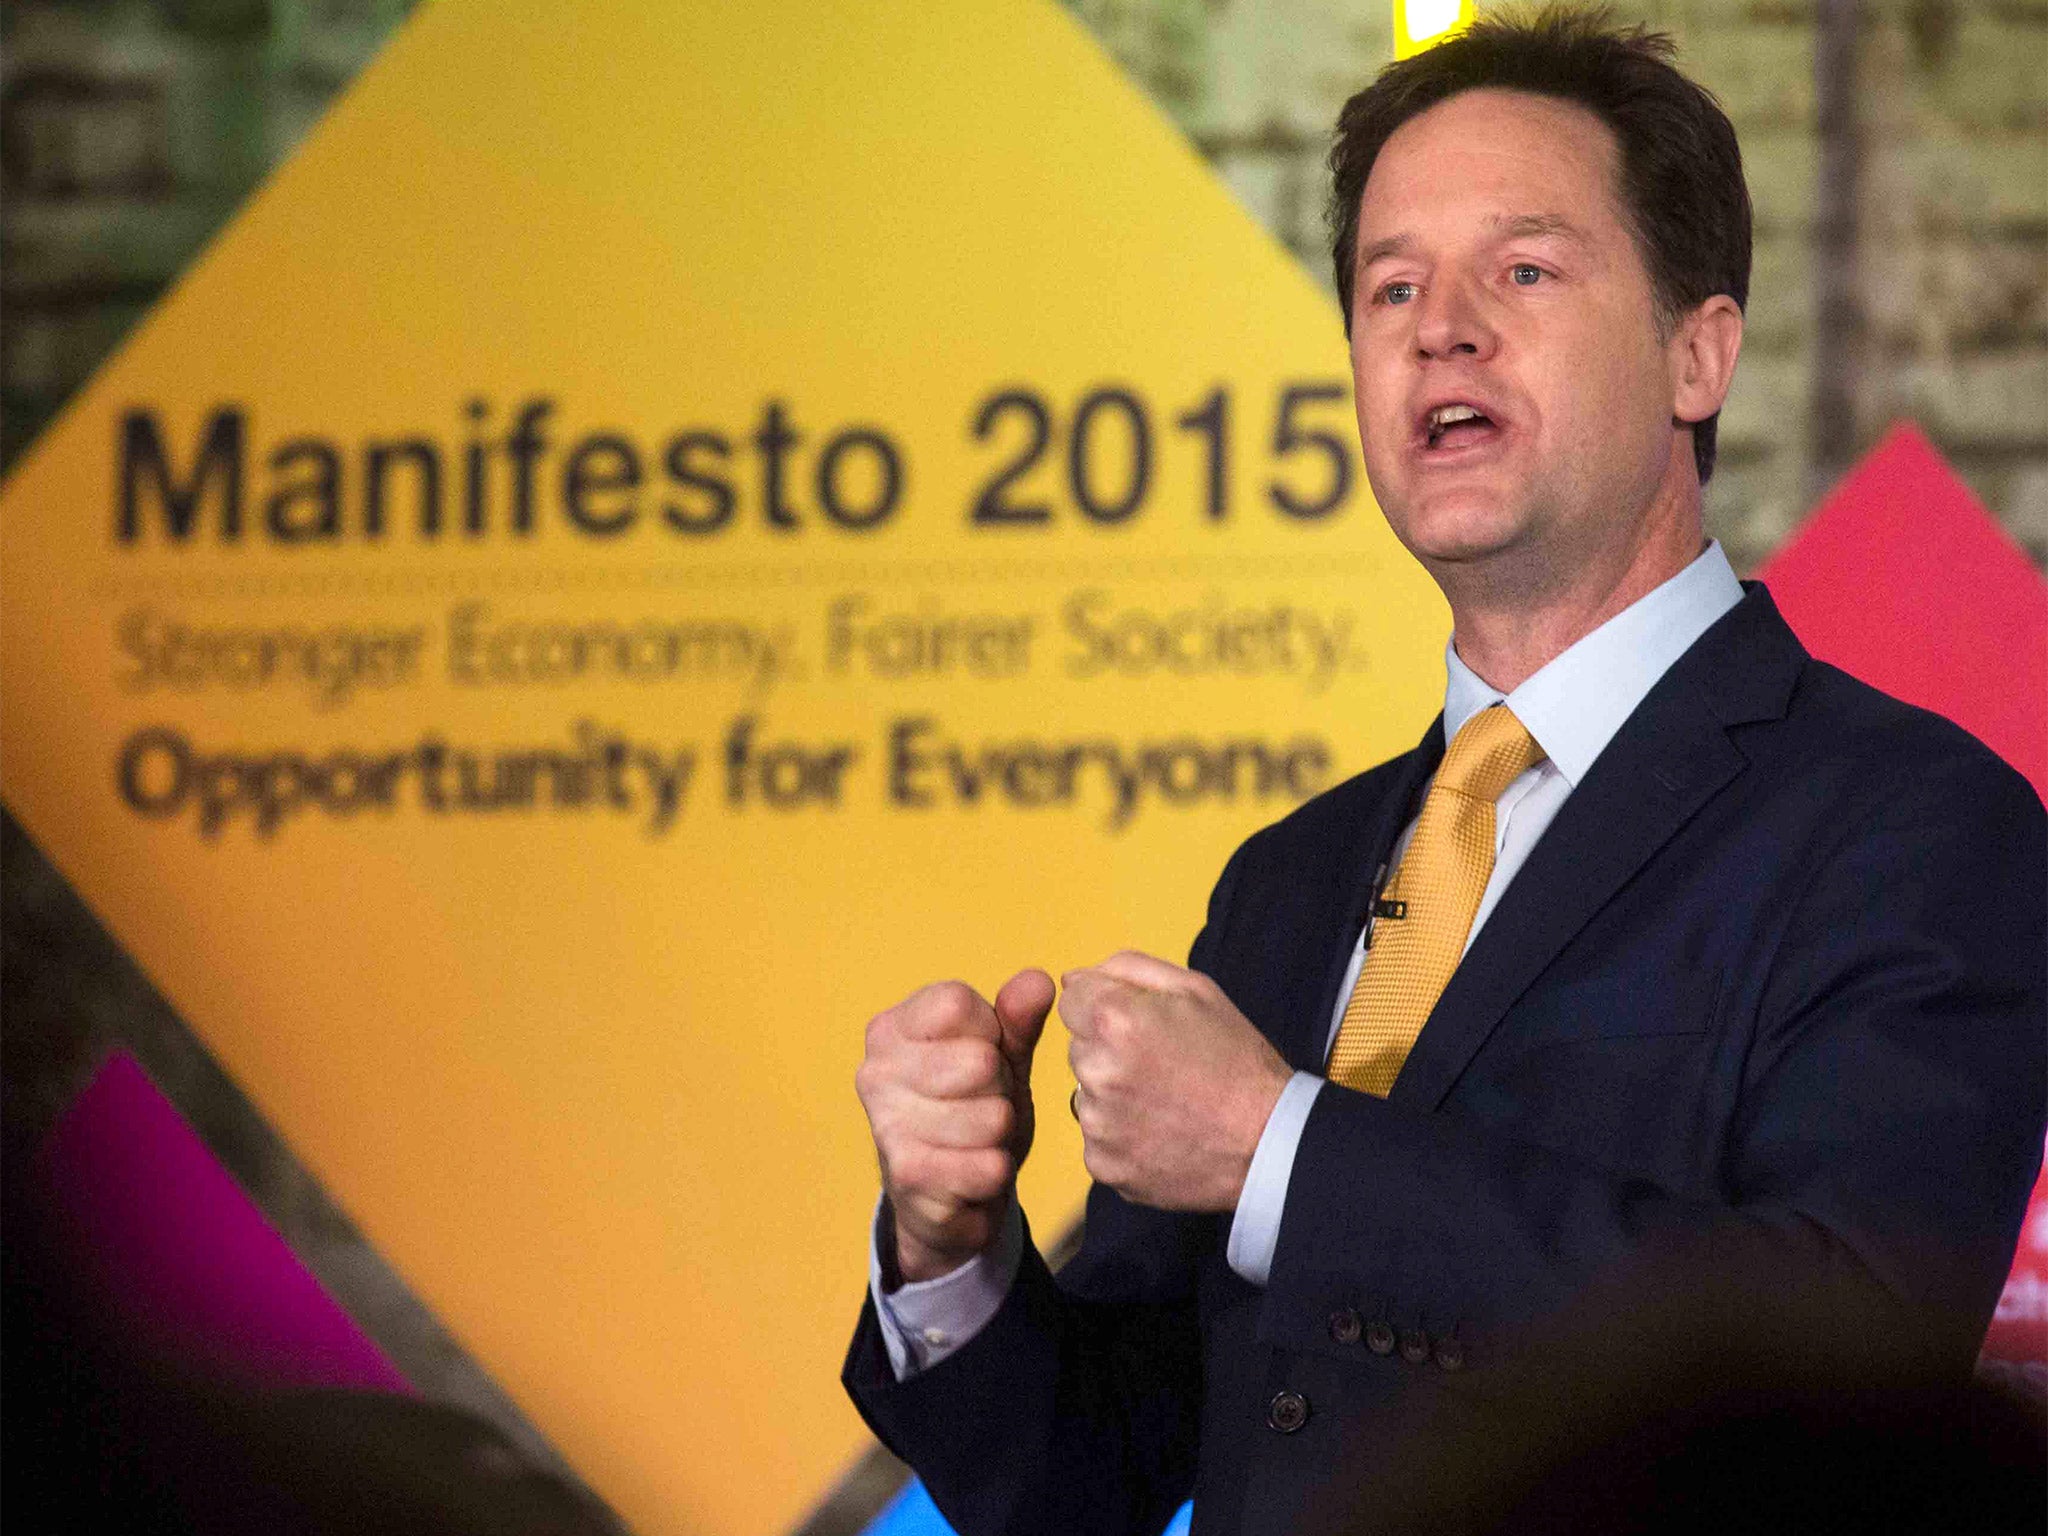 Liberal Democrat leader Nick Clegg speaks at the launch of his party's manifesto